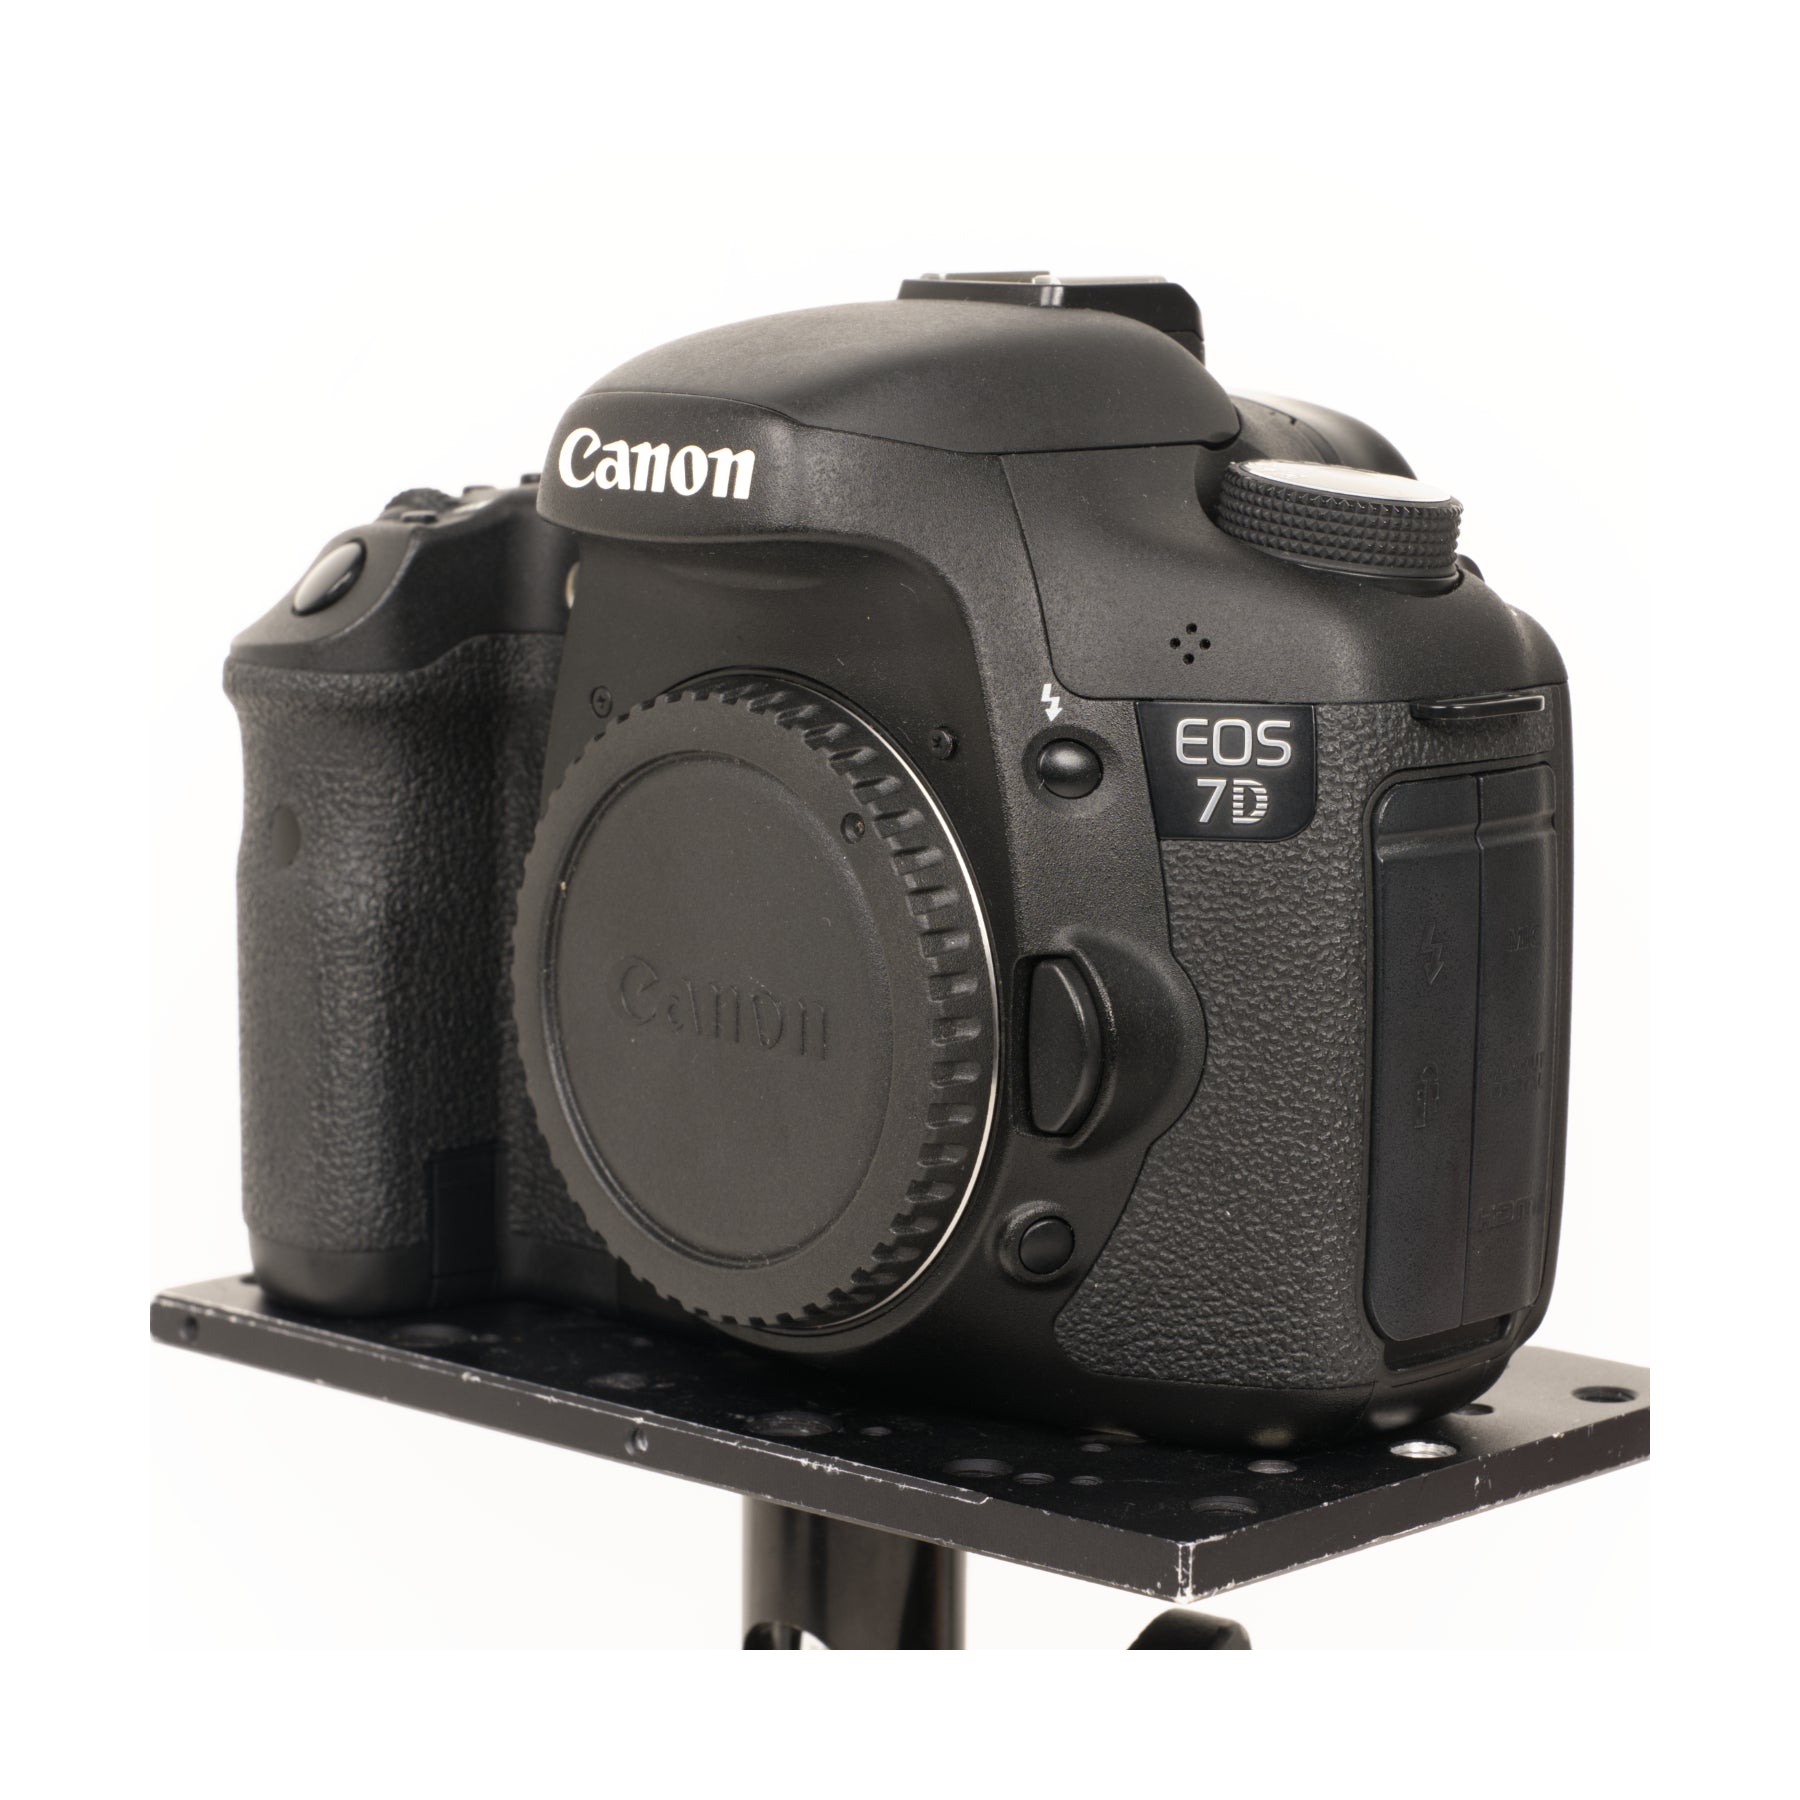 Buy Second hand camera Canon 7D with 18-135mm lens at Topic Store